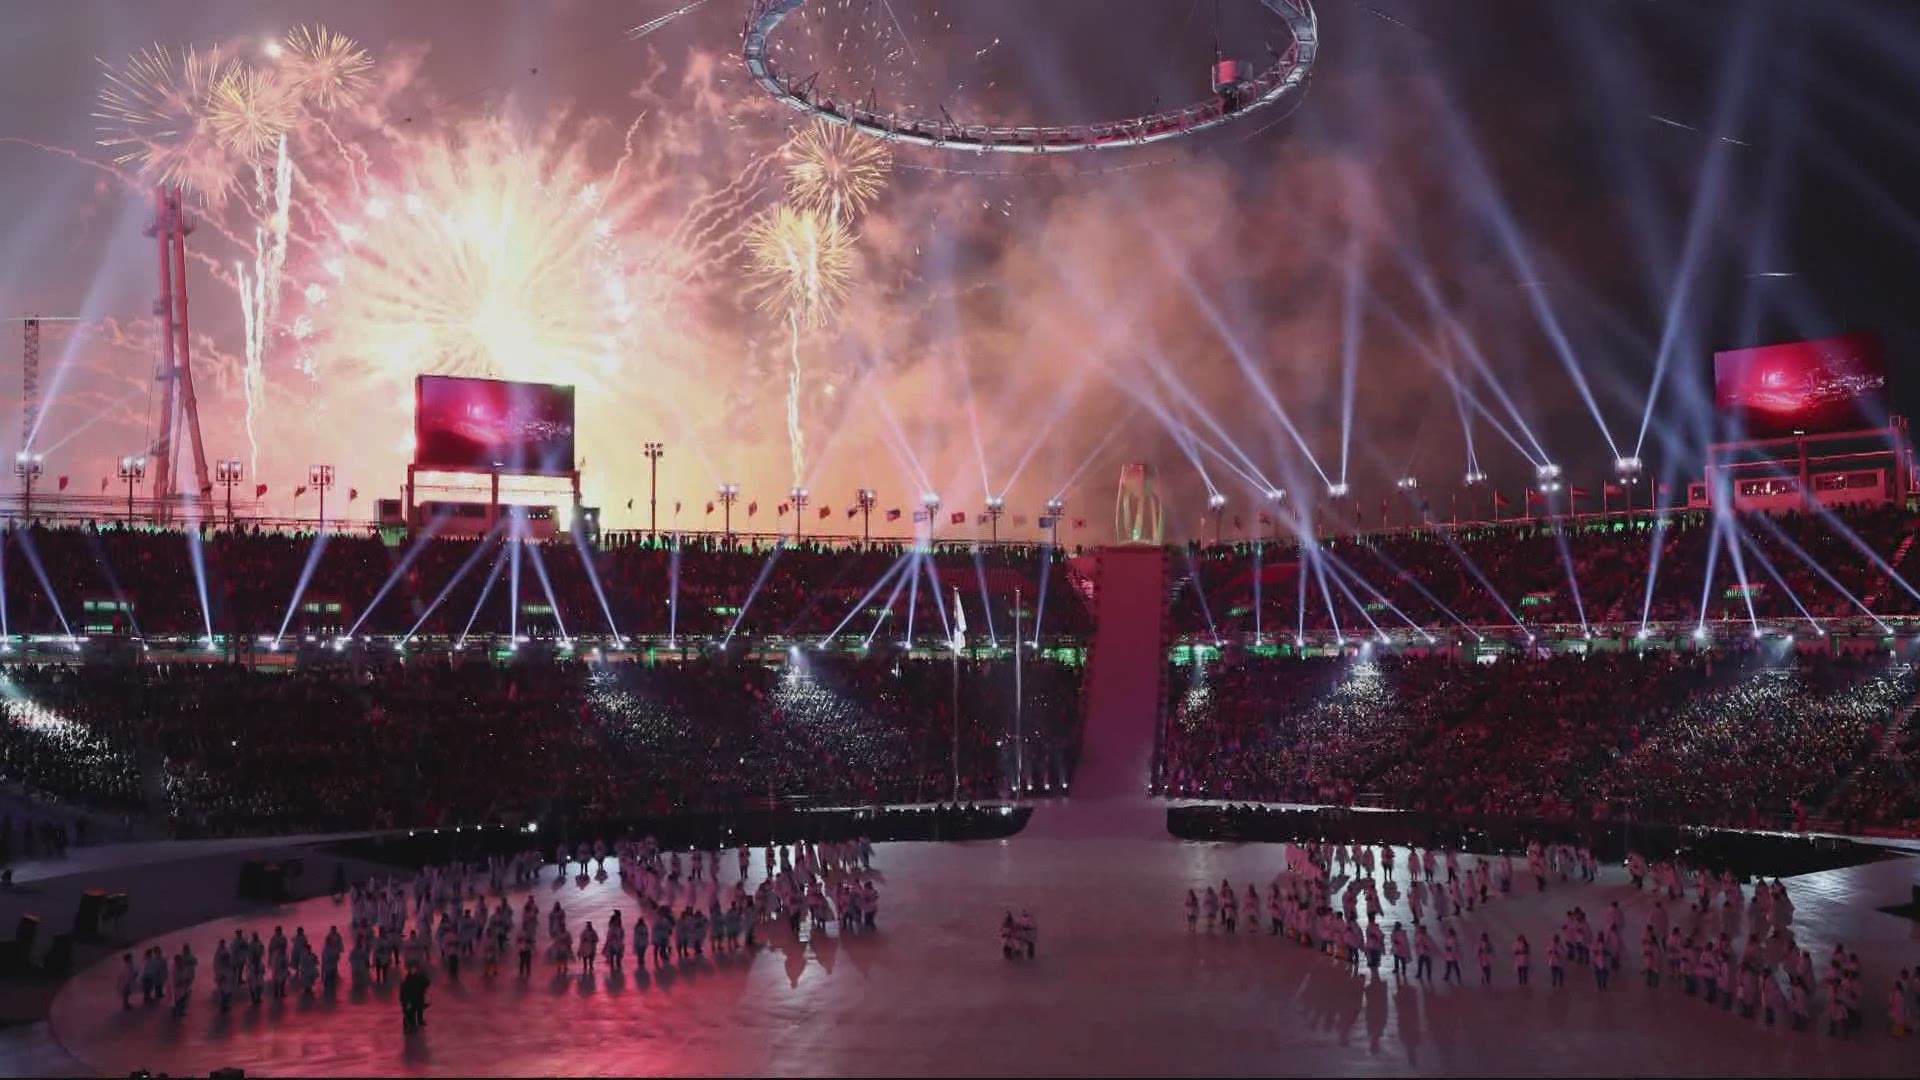 Without any fans, next week's Olympic Opening Ceremony will probably look a little different this year.